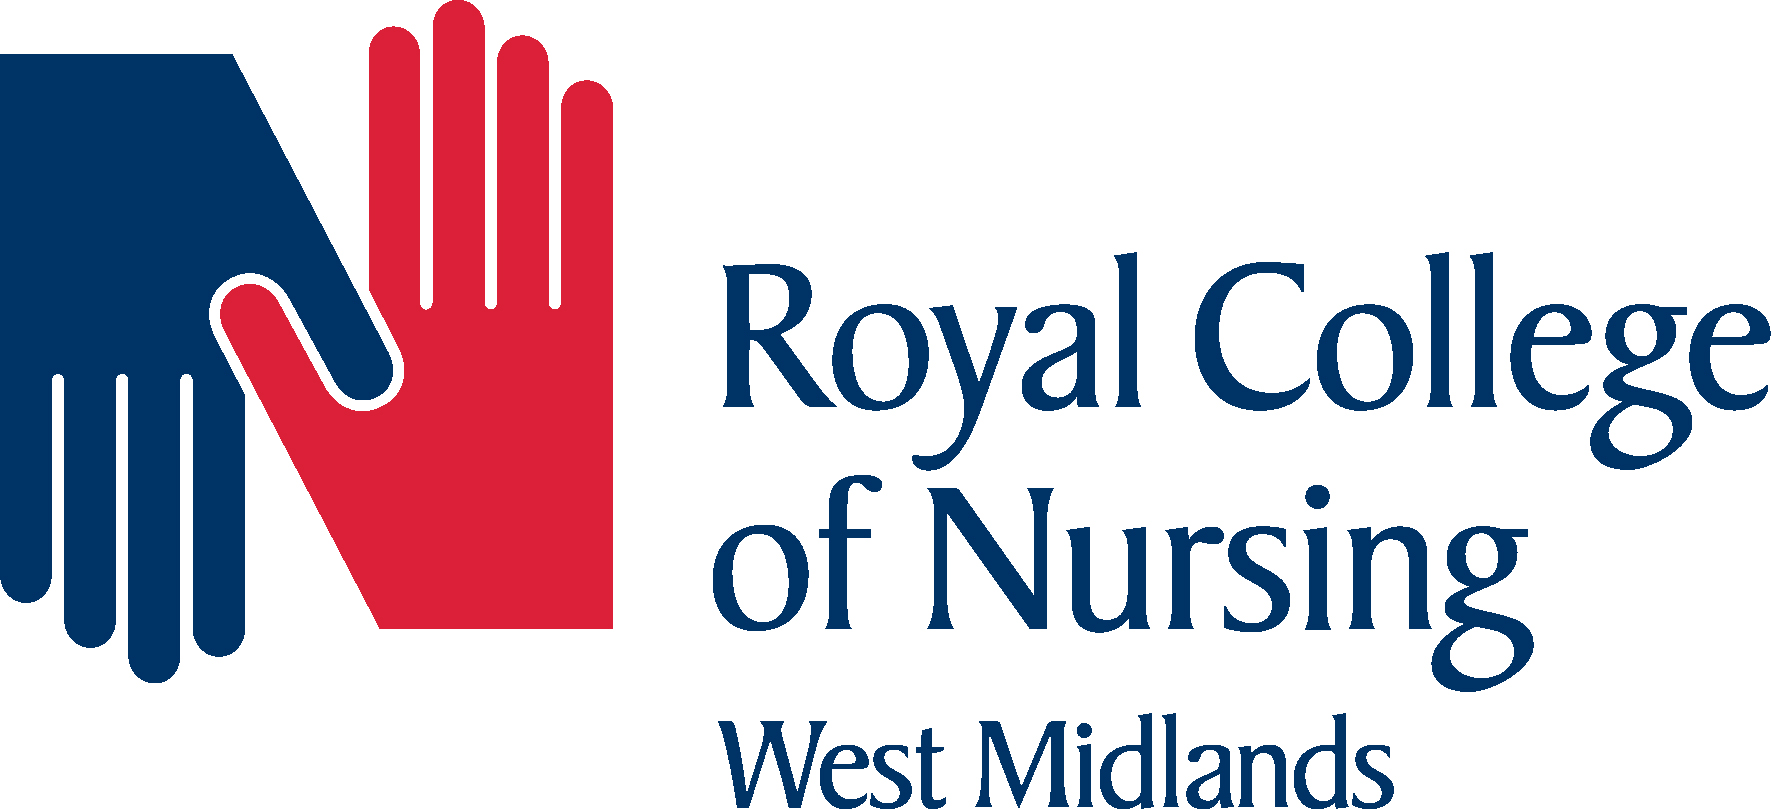 Royal College of Nursing are exhibiting at Nursing Careers and Jobs Fair